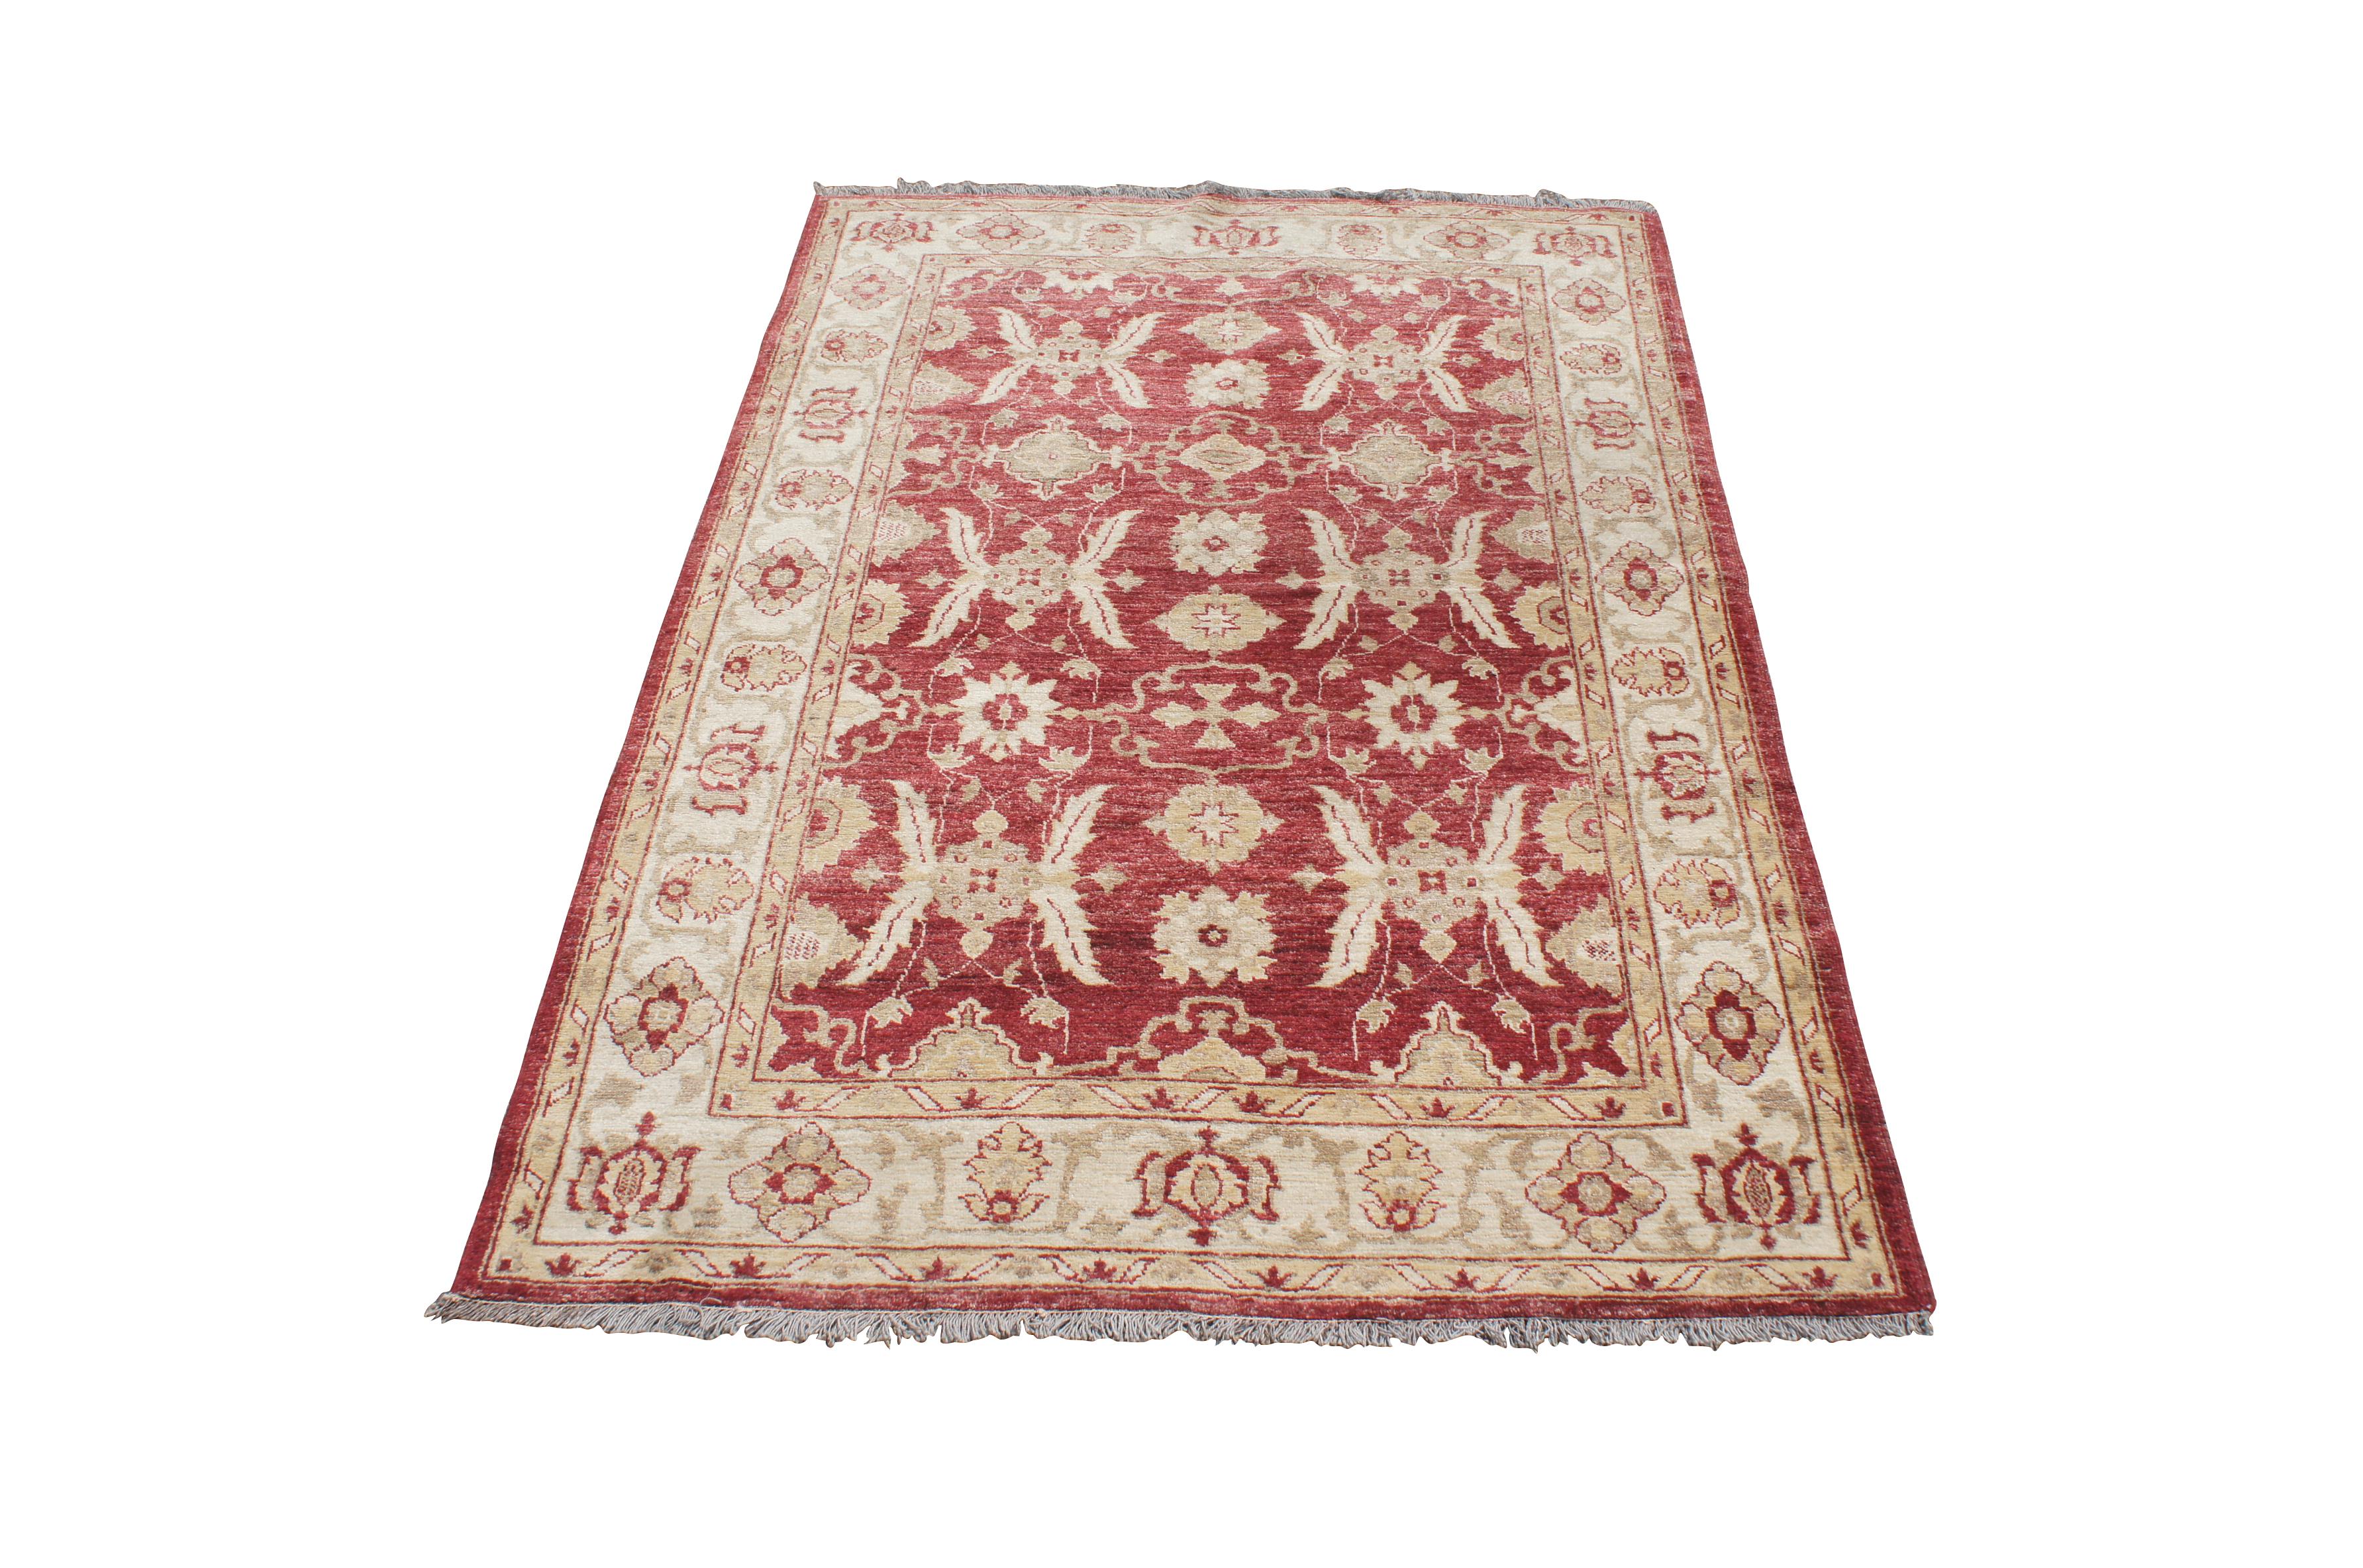 An exceptional floral area rug.  Hand spun with natural dyes in Turkey. Beautifully designed with an eye catching geometric pattern. Features Reds and beiges

Dimensions:
60.5